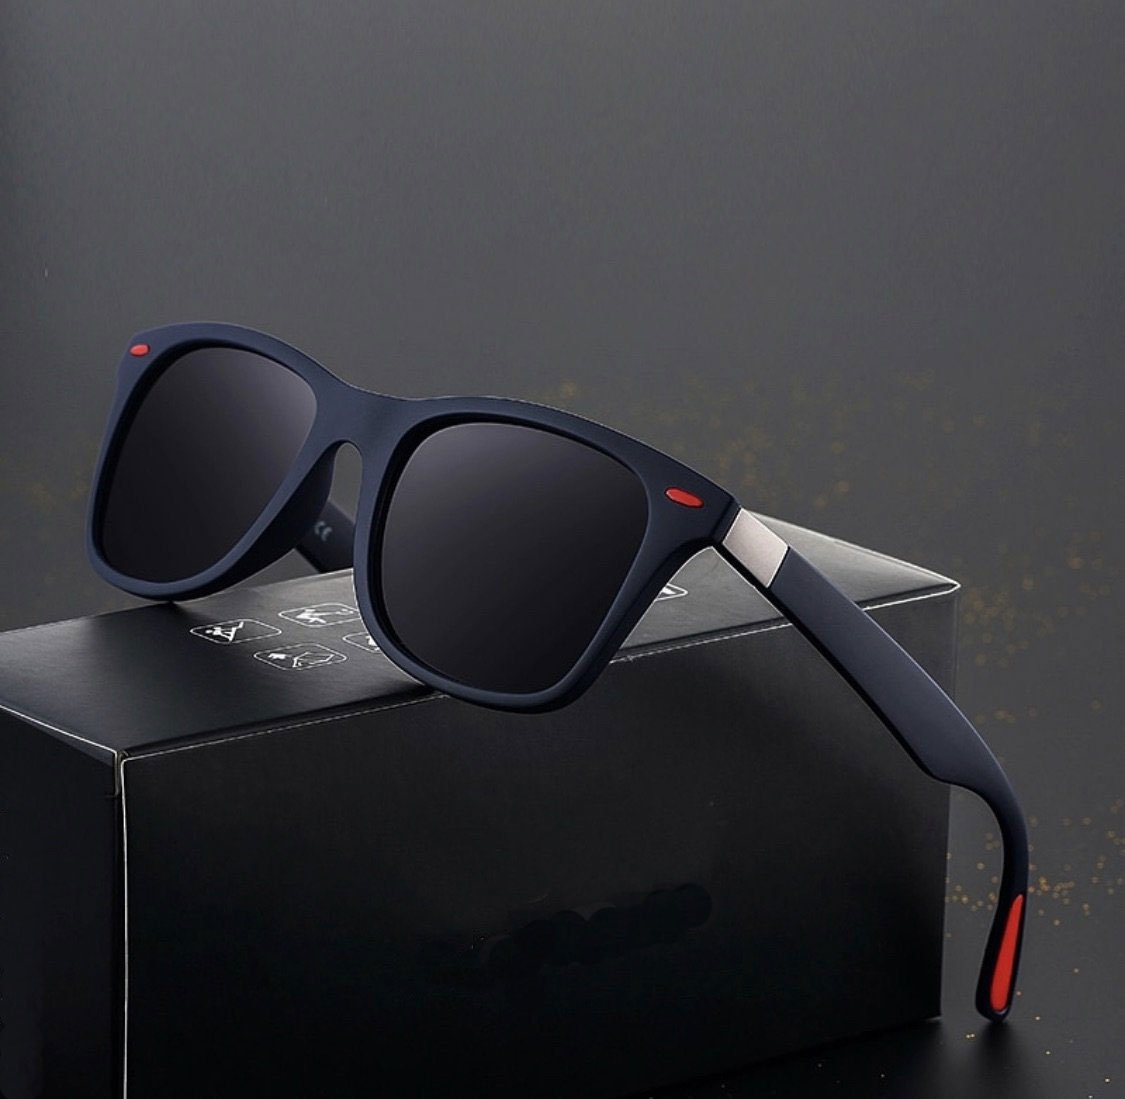 Spidey Navy Blue Eyewear For Men And Women-FunkyTradition